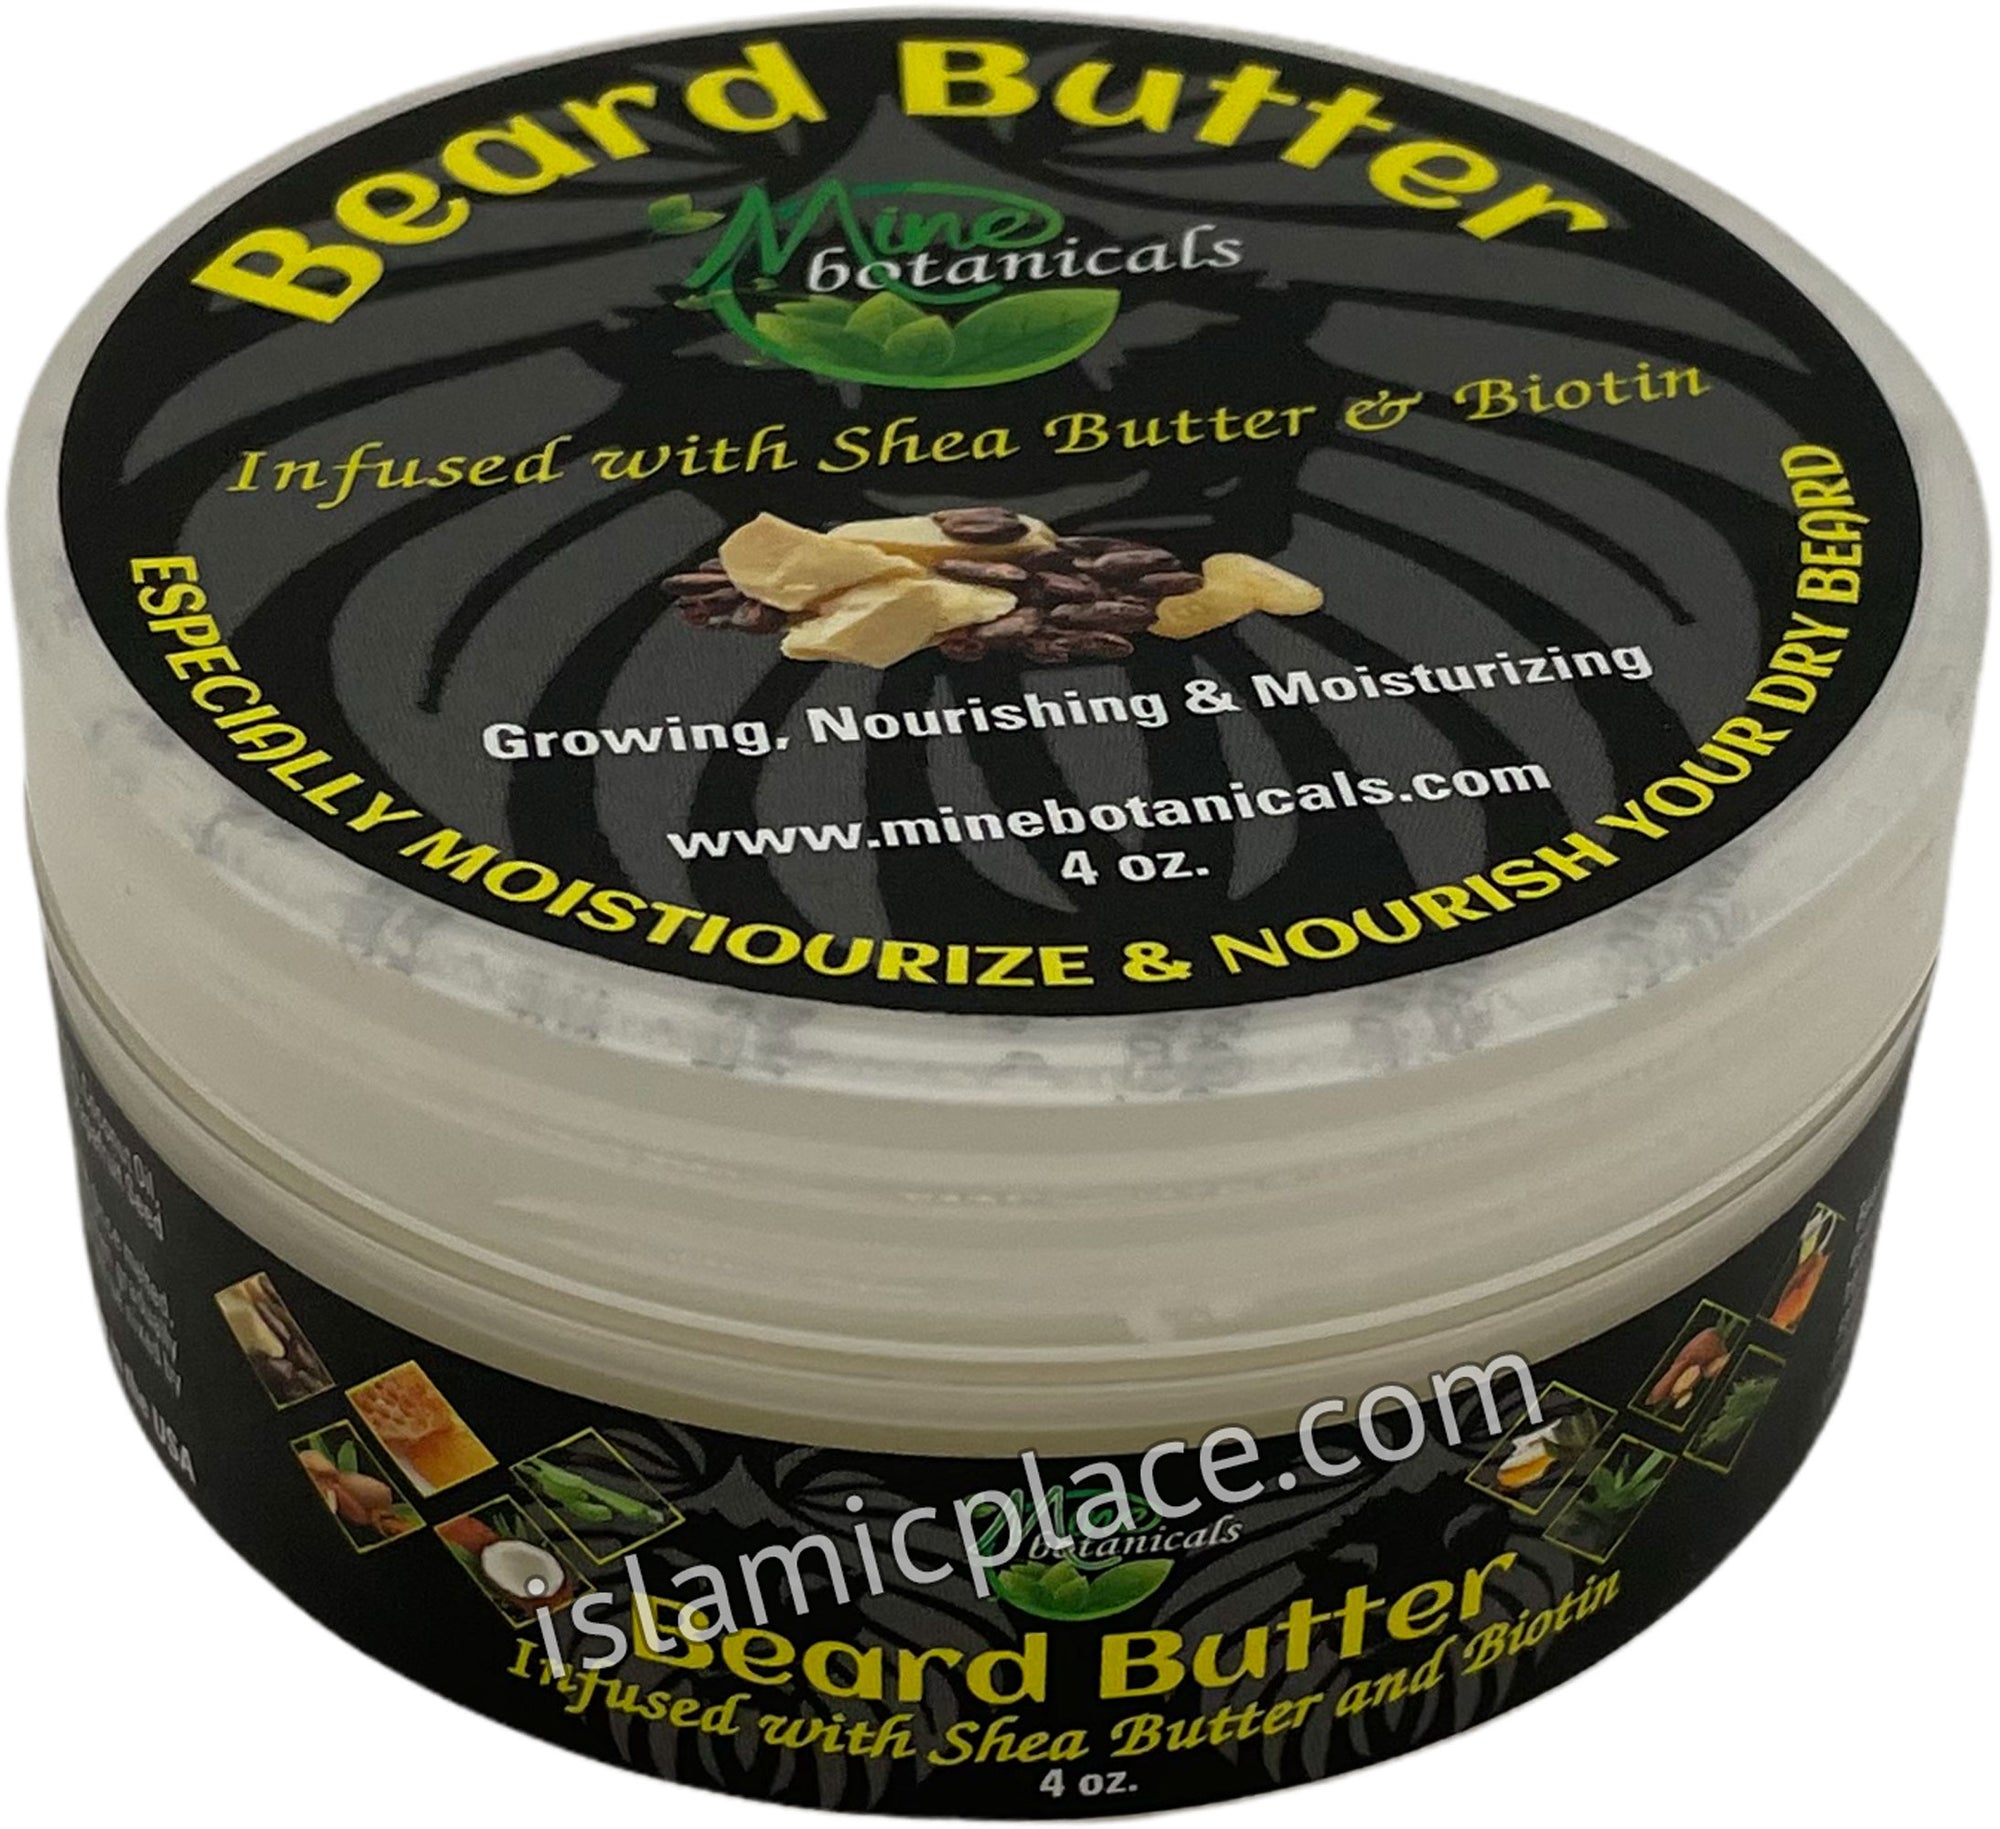 Beard Butter - Infused with Shea Butter & Biotin